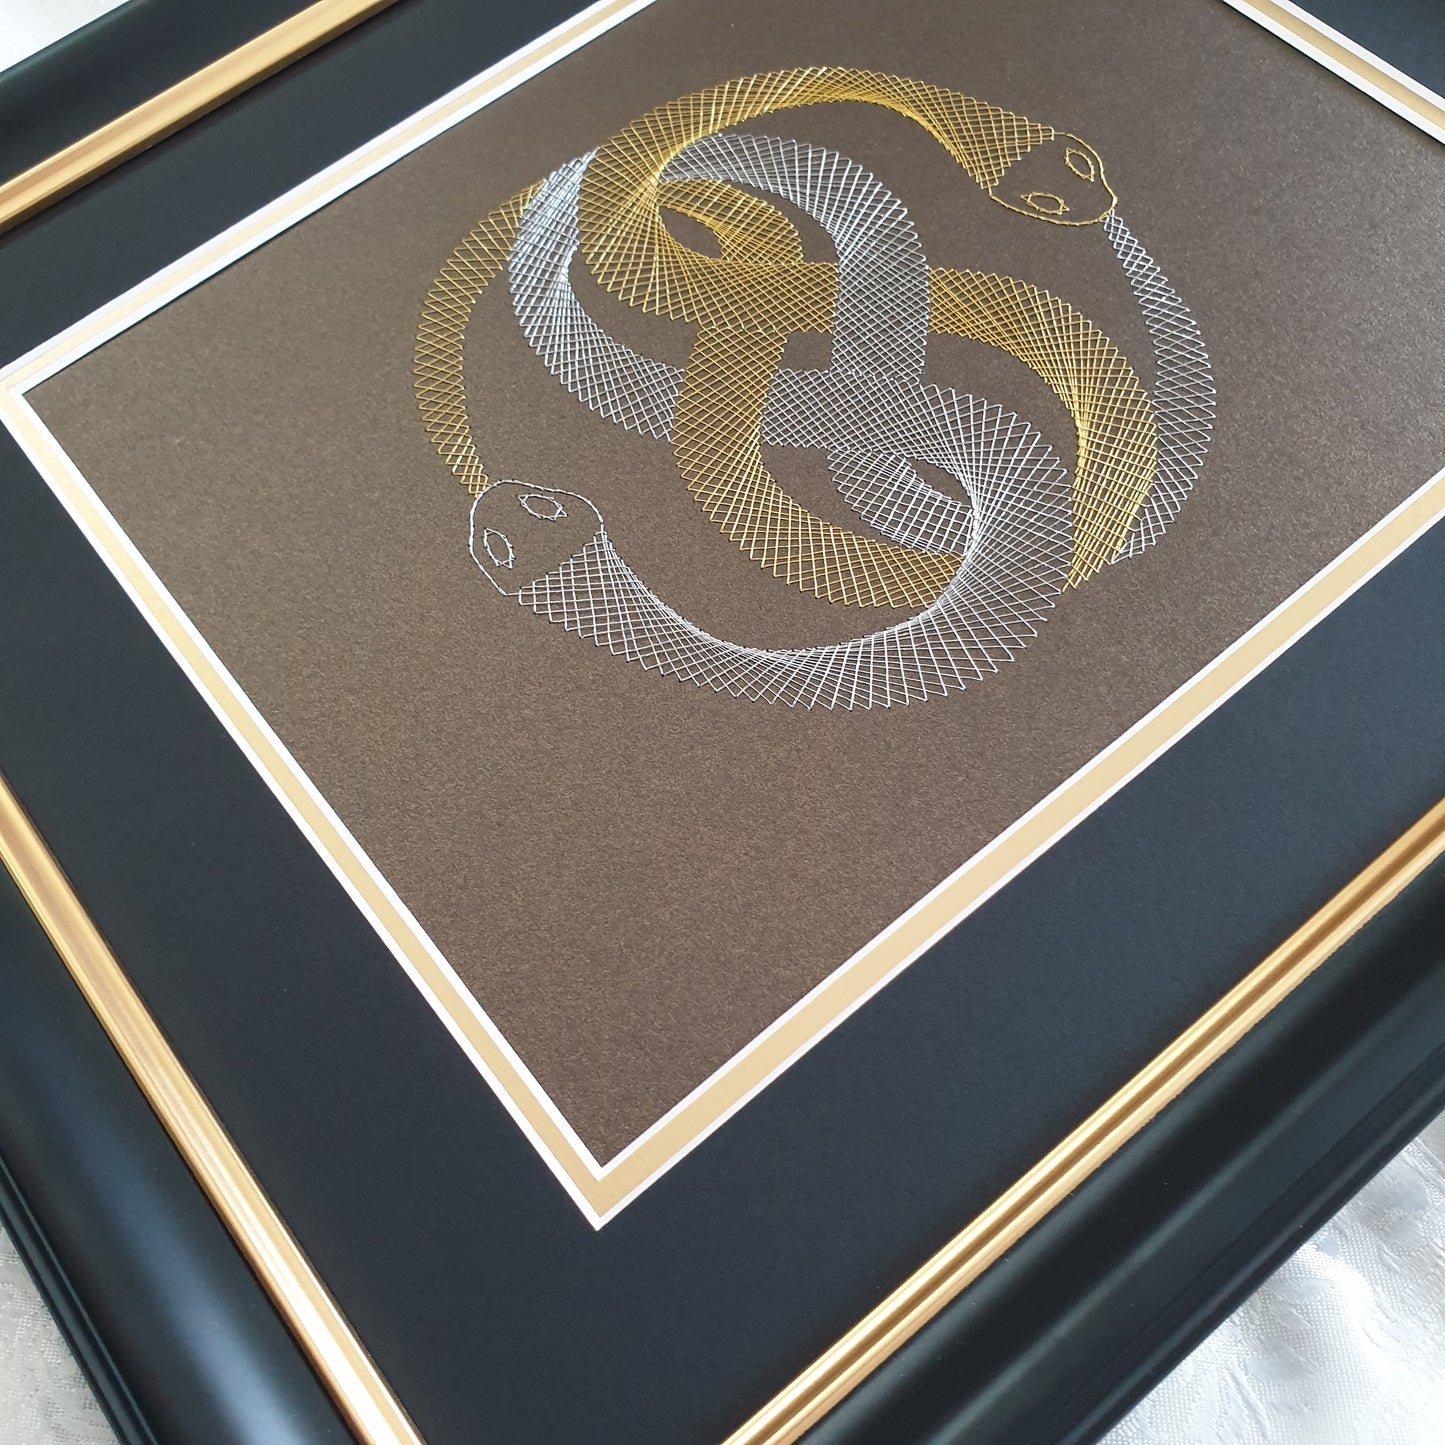 Auryn (The Neverending Story) Inspired Hand-Stitched Artwork (Brown Card)